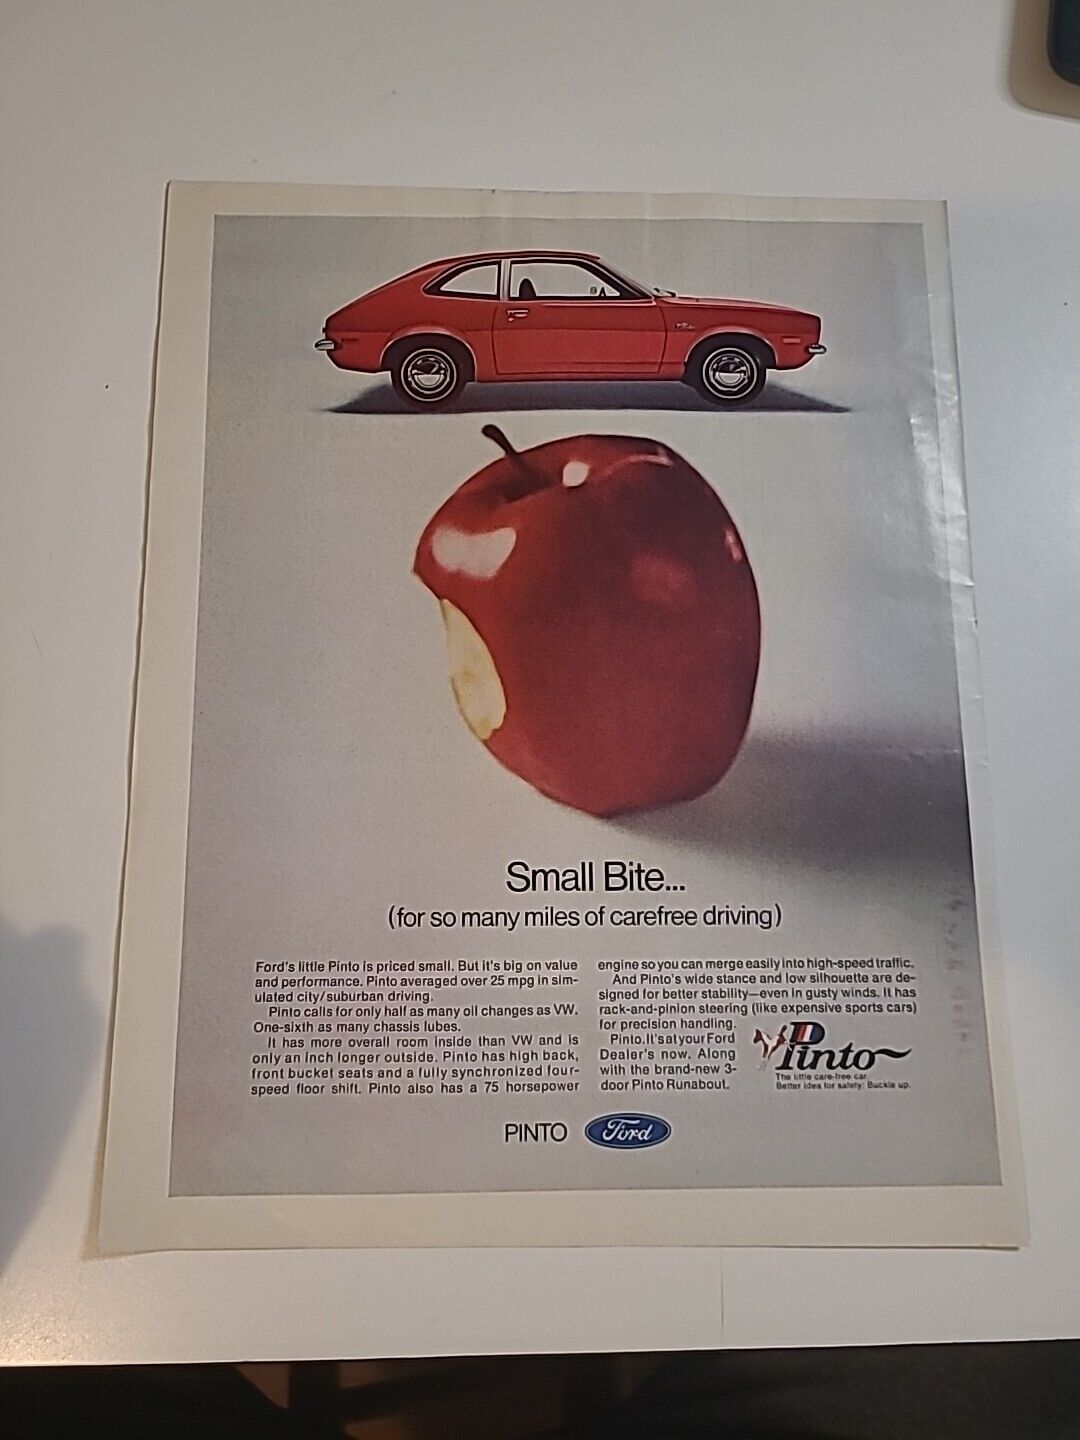 Ford Pinto Small Bite  1971 Vintage PRINT AD  10x13